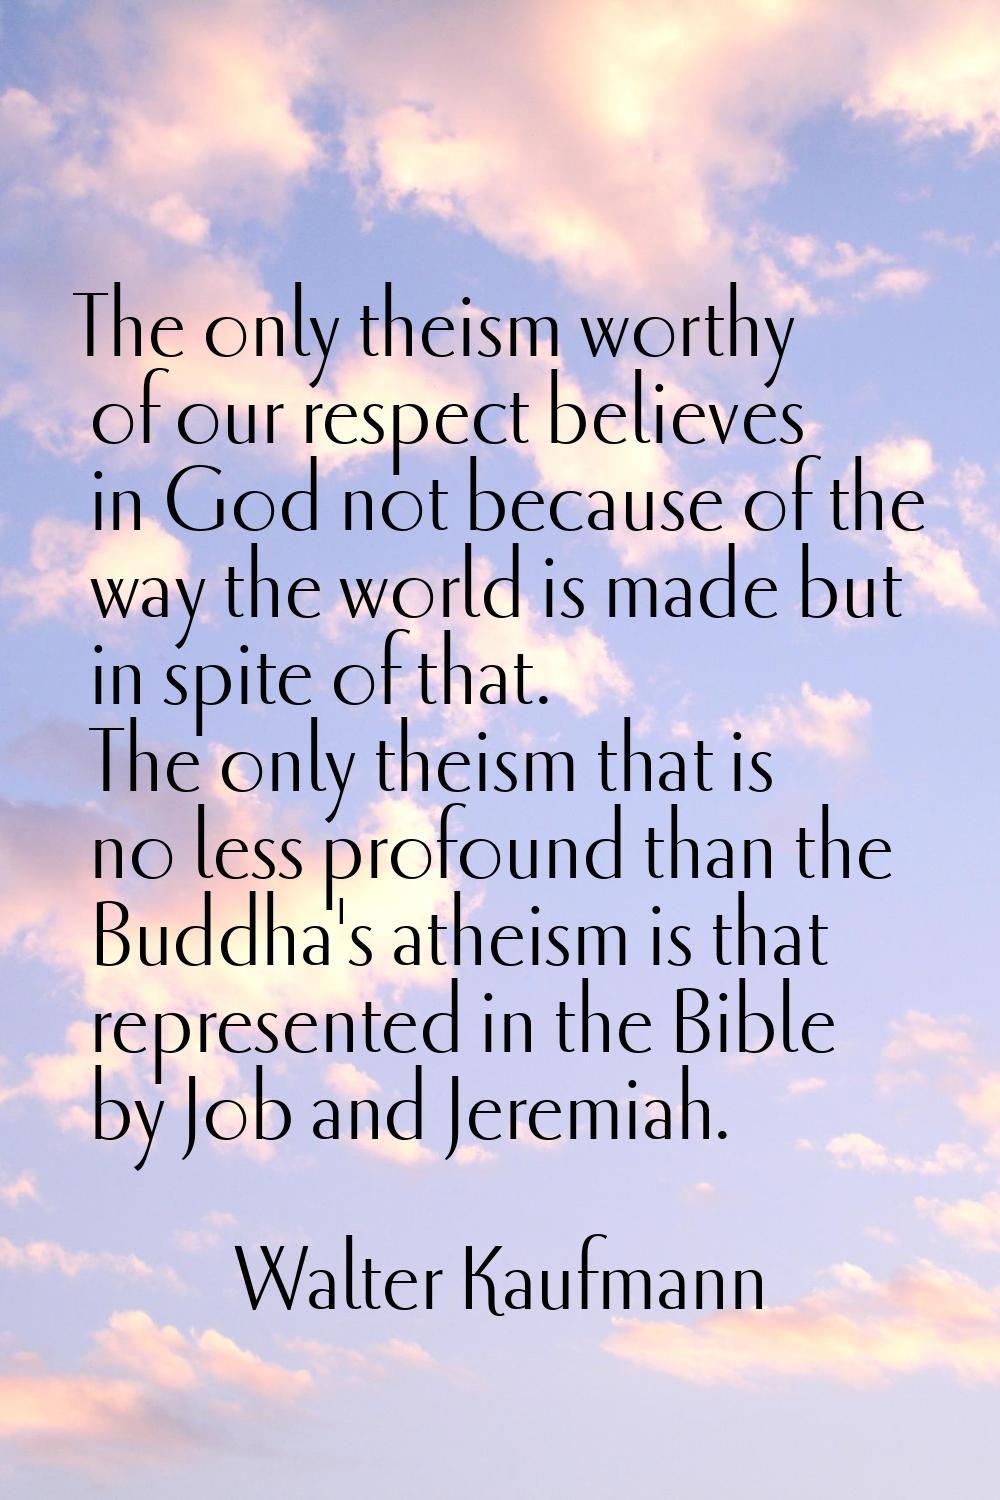 The only theism worthy of our respect believes in God not because of the way the world is made but 